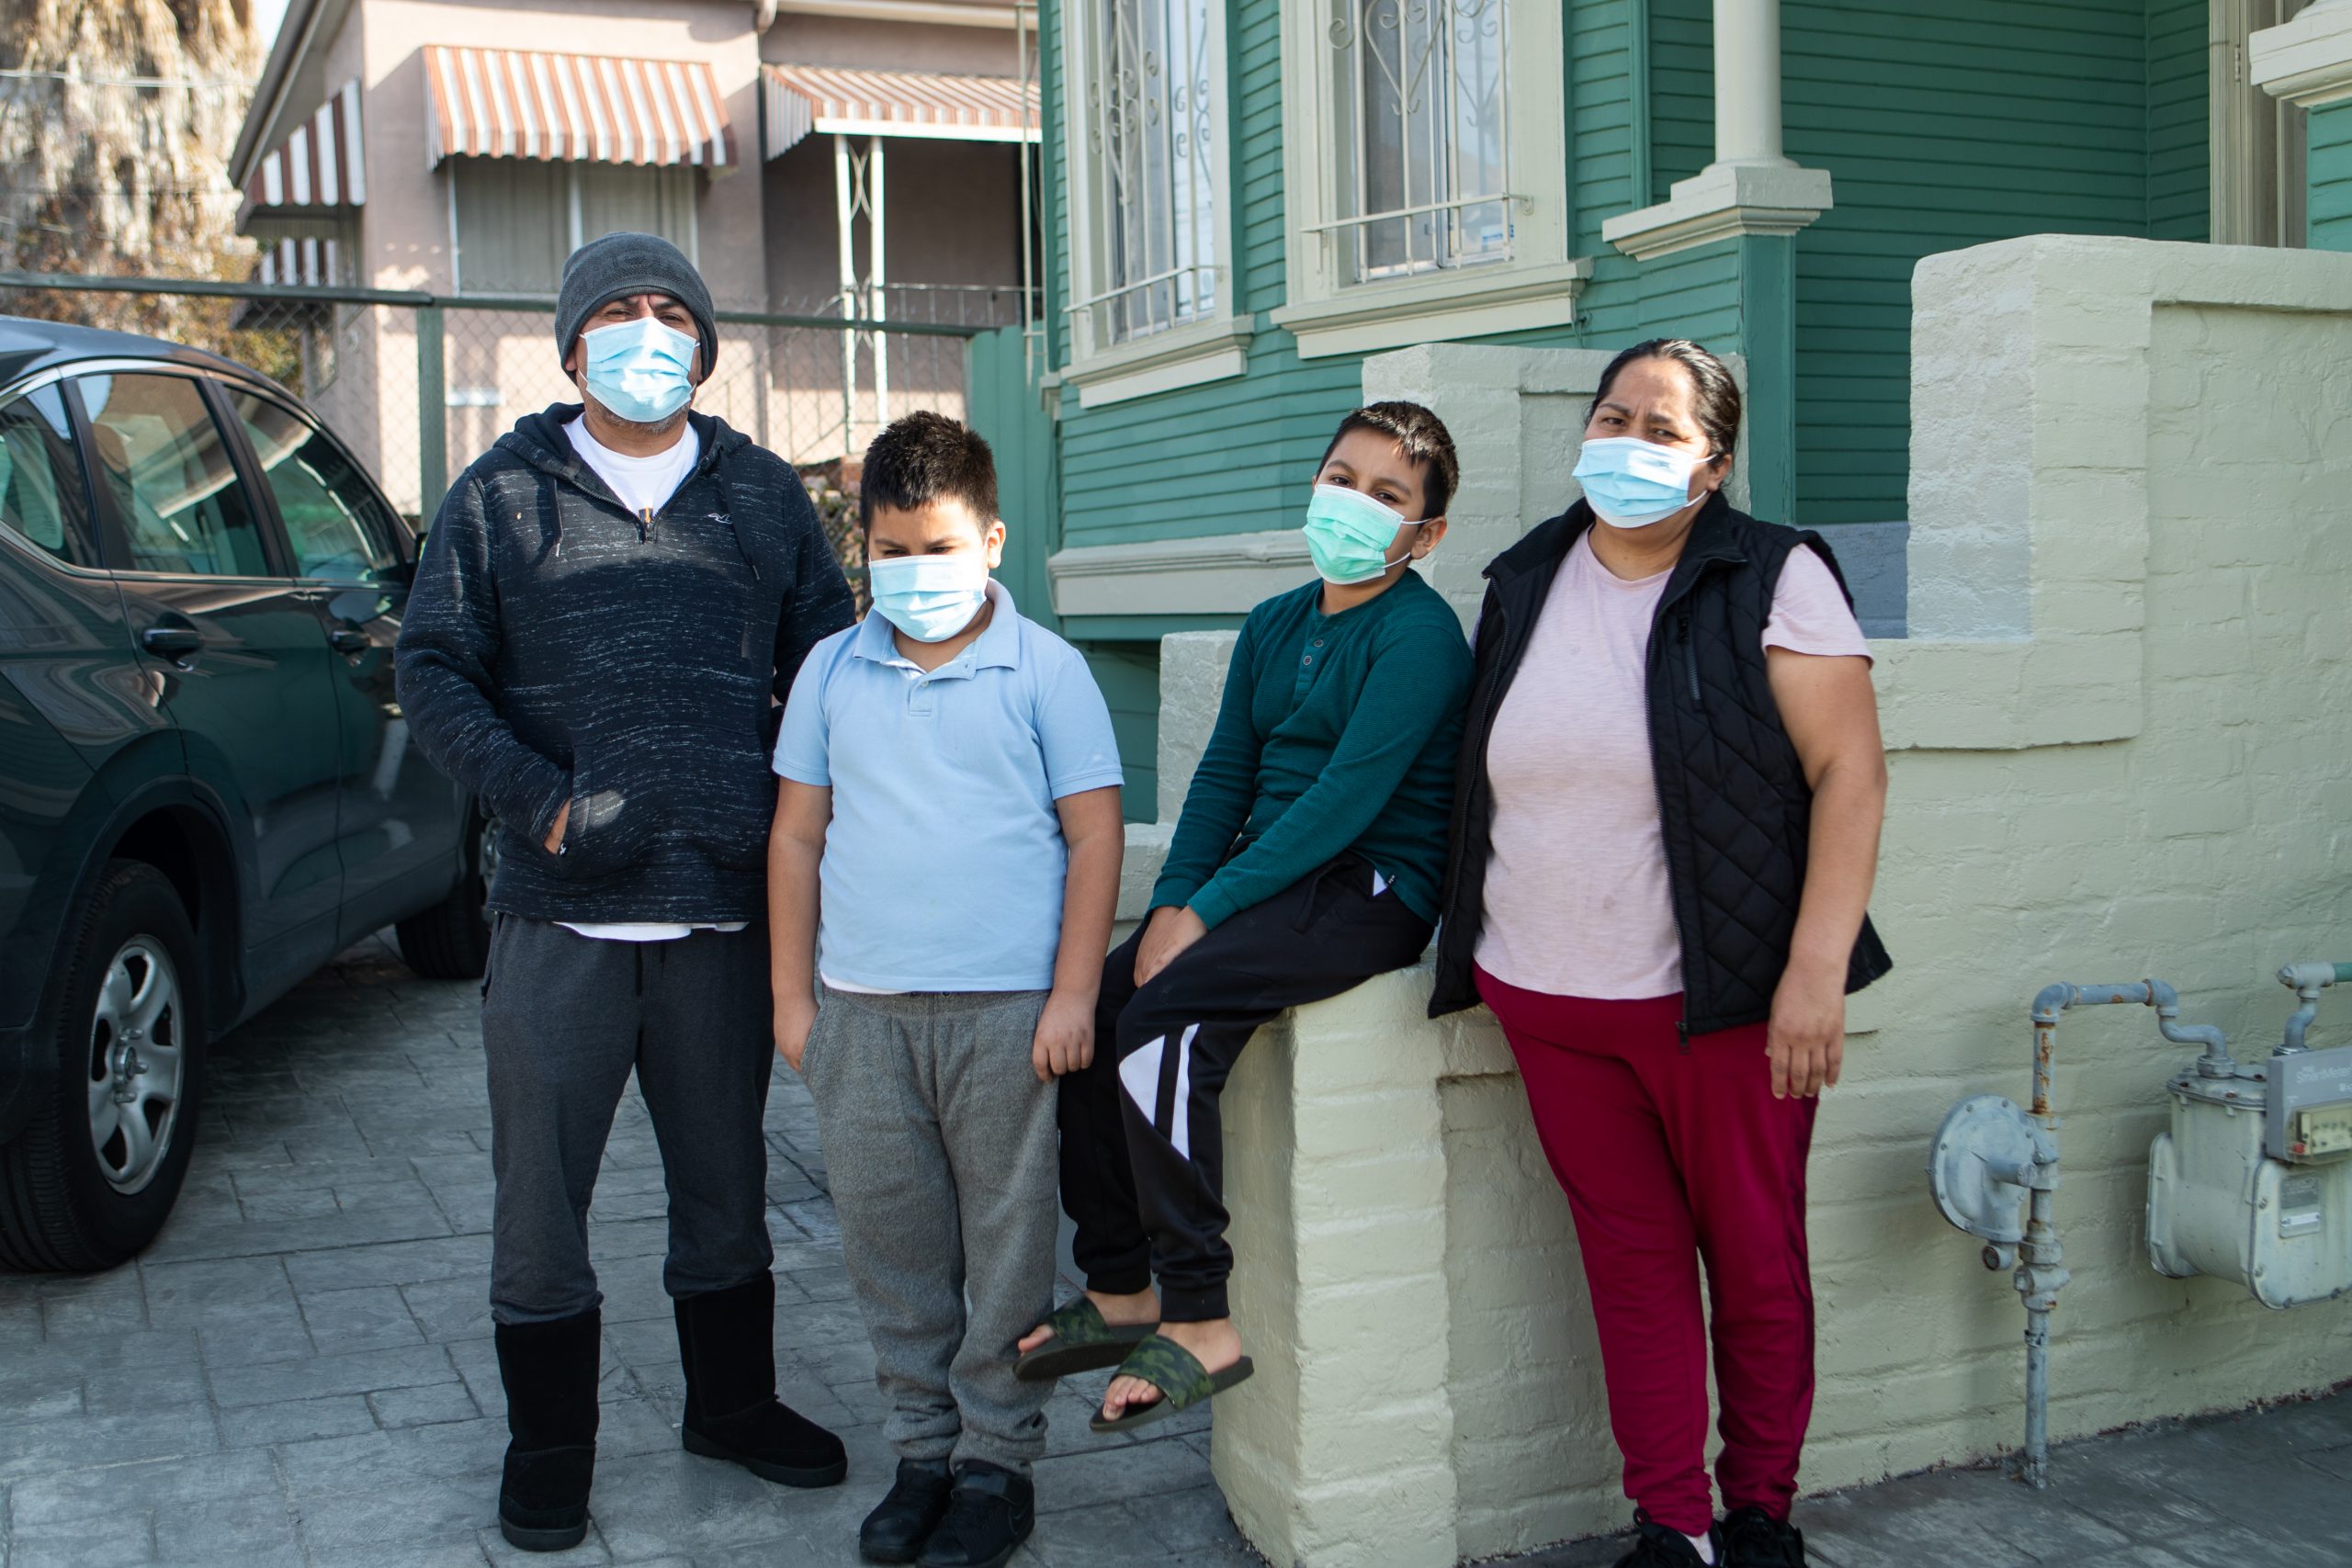 Maria González and her family in front of their home in East Oakland.